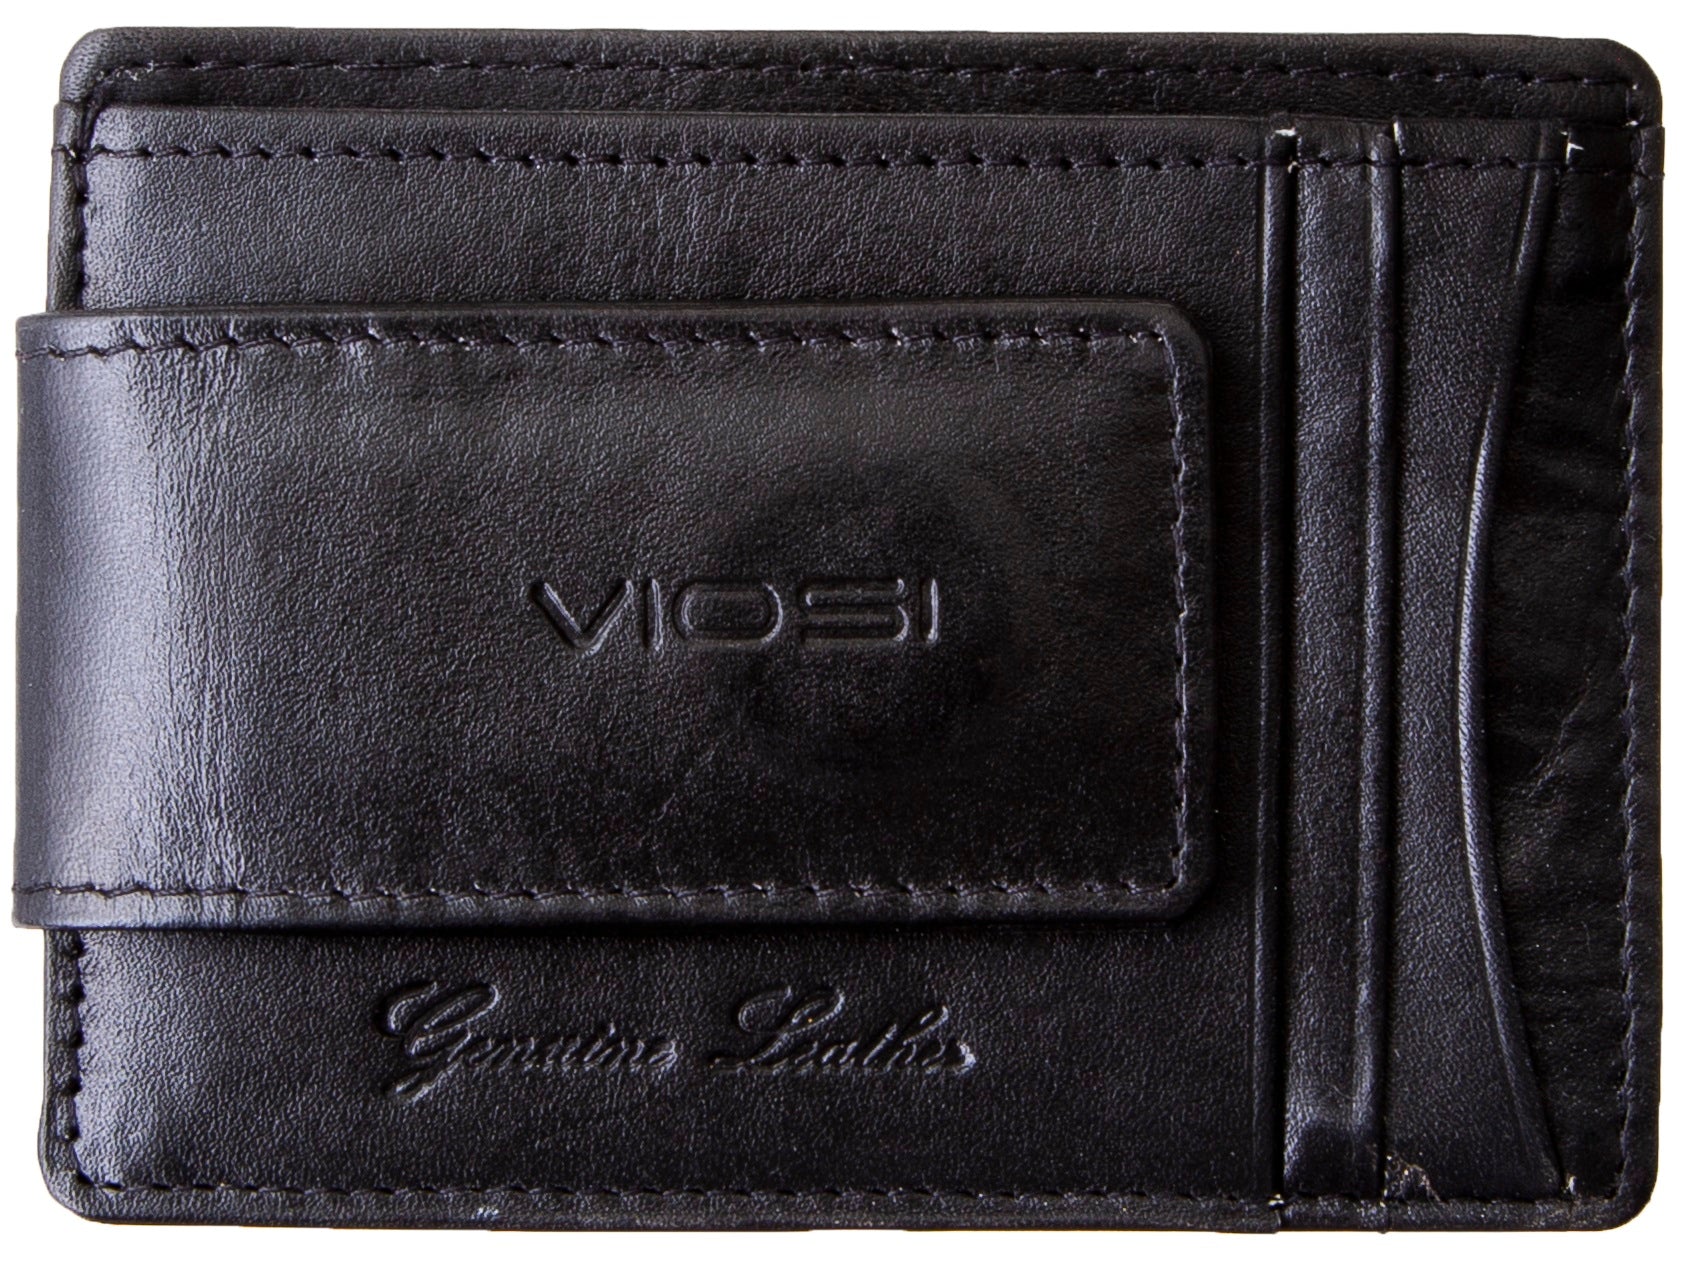 Dollaro RFID Protected Money Clip Wallet with Coin Pocket - Black